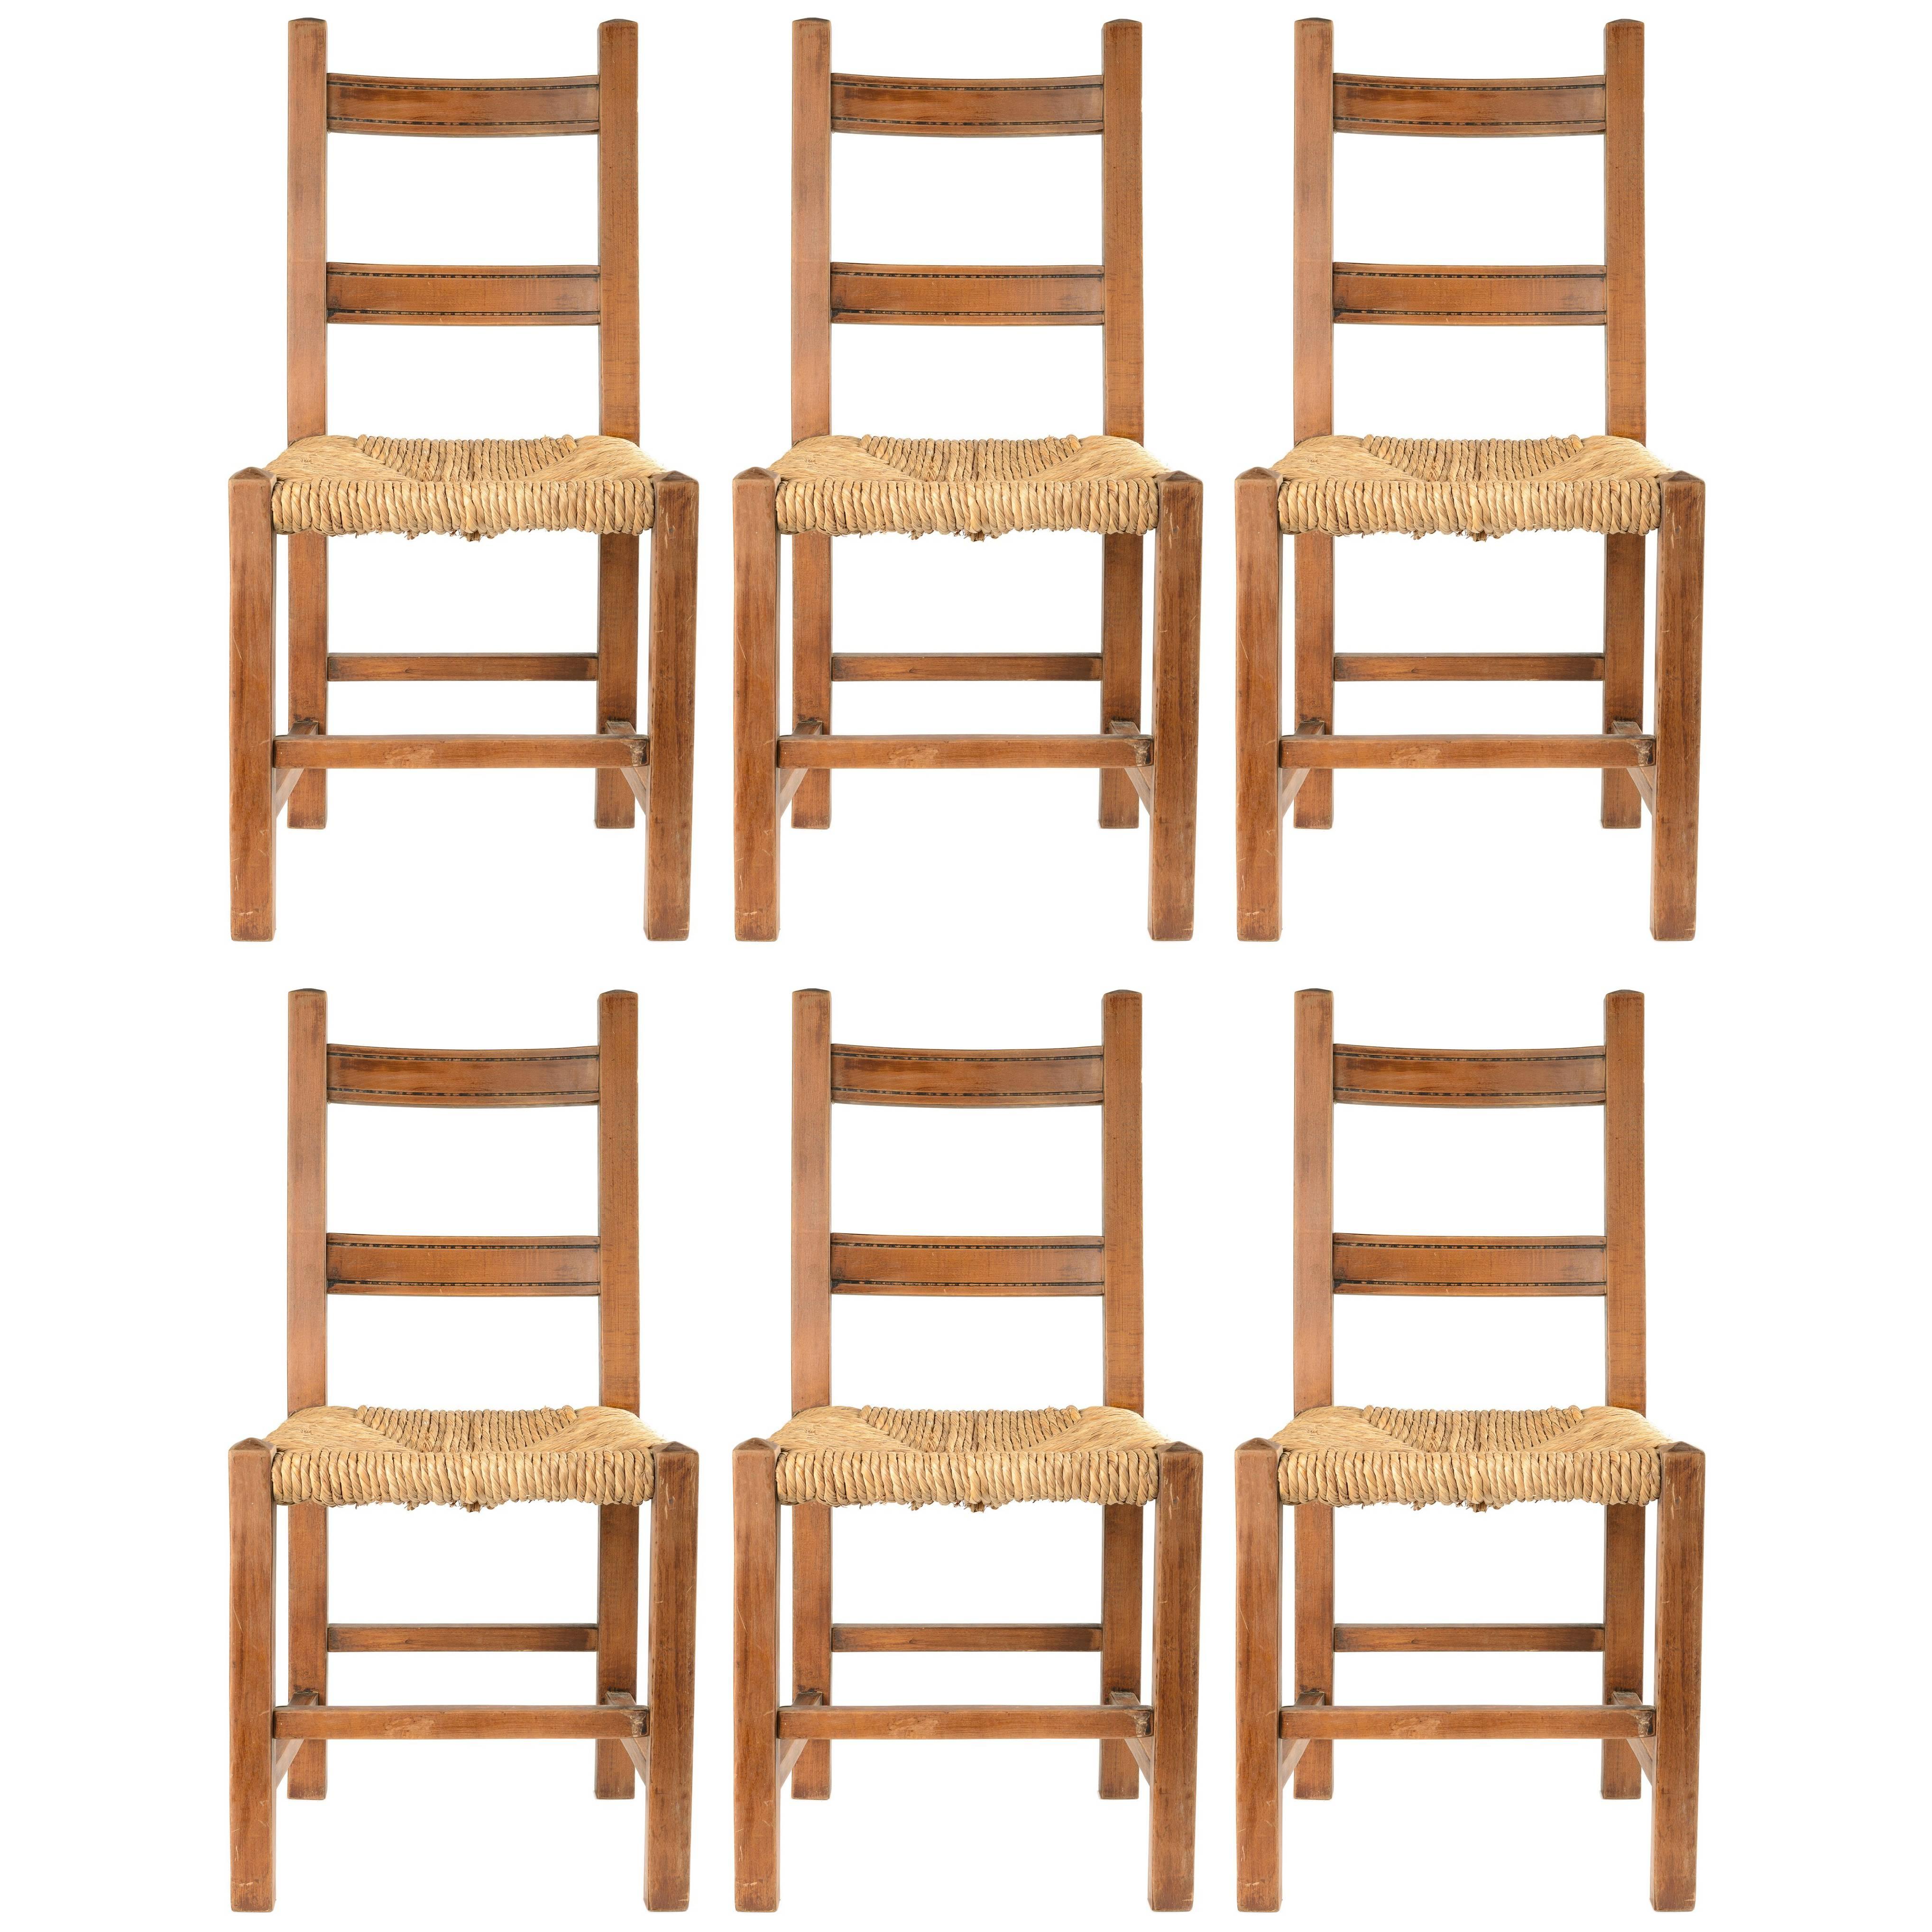 19th Century Rustic Belgian Handcrafted Ladder Back Chair Set